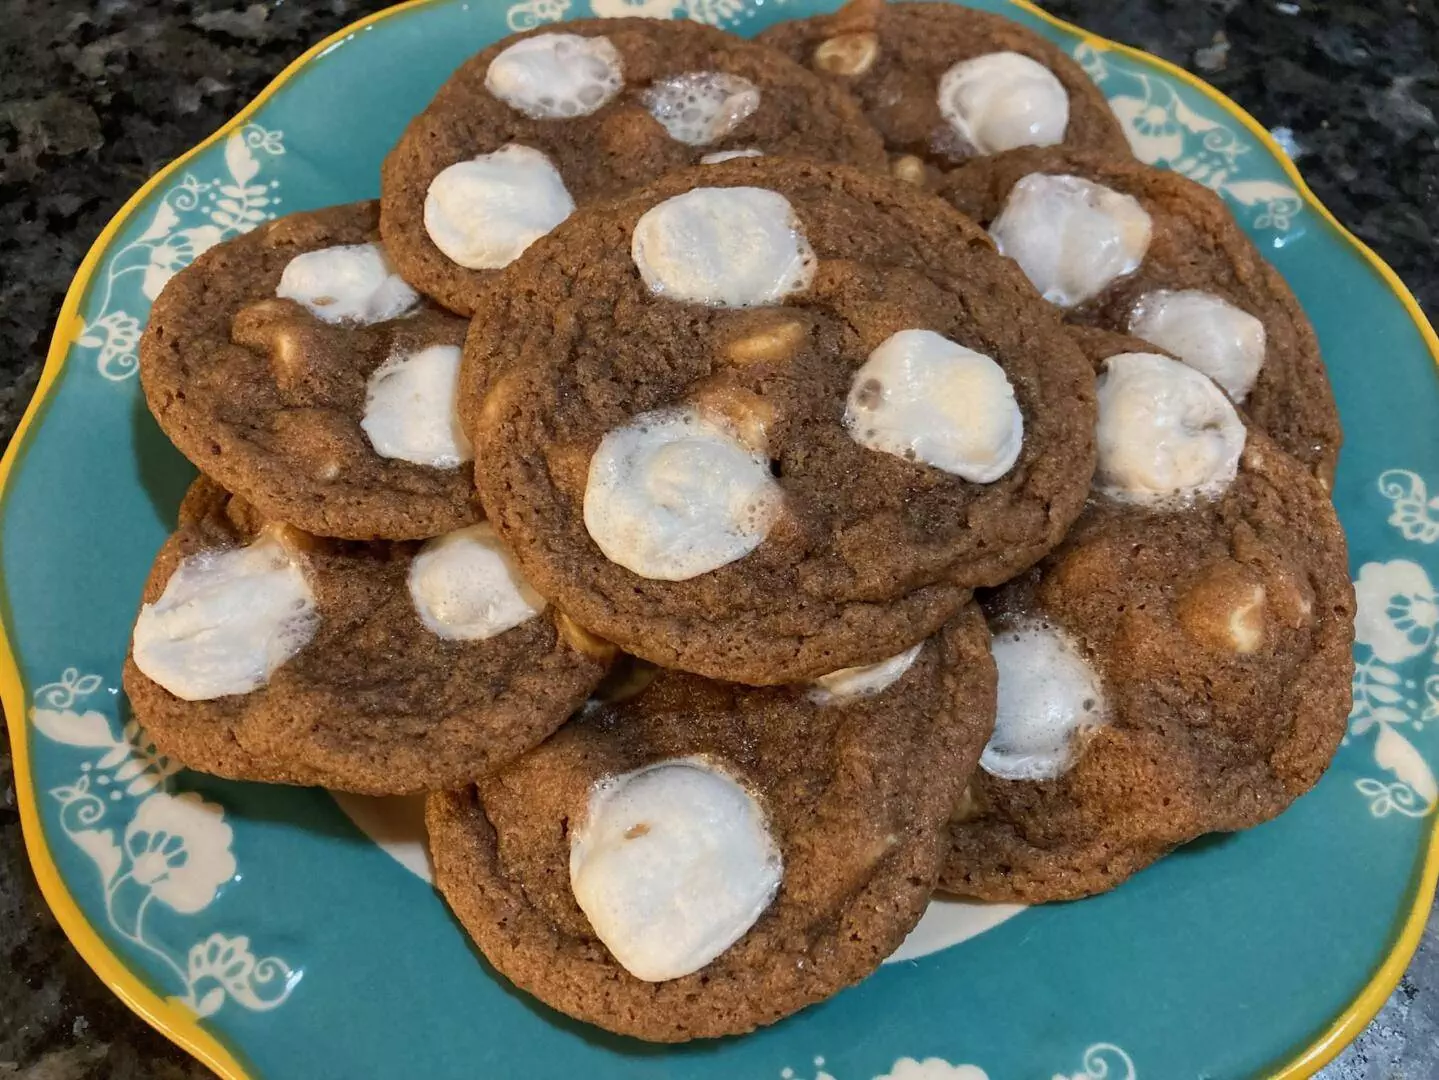 Easy Hot Chocolate Cookies from Out of the Box Baking.com